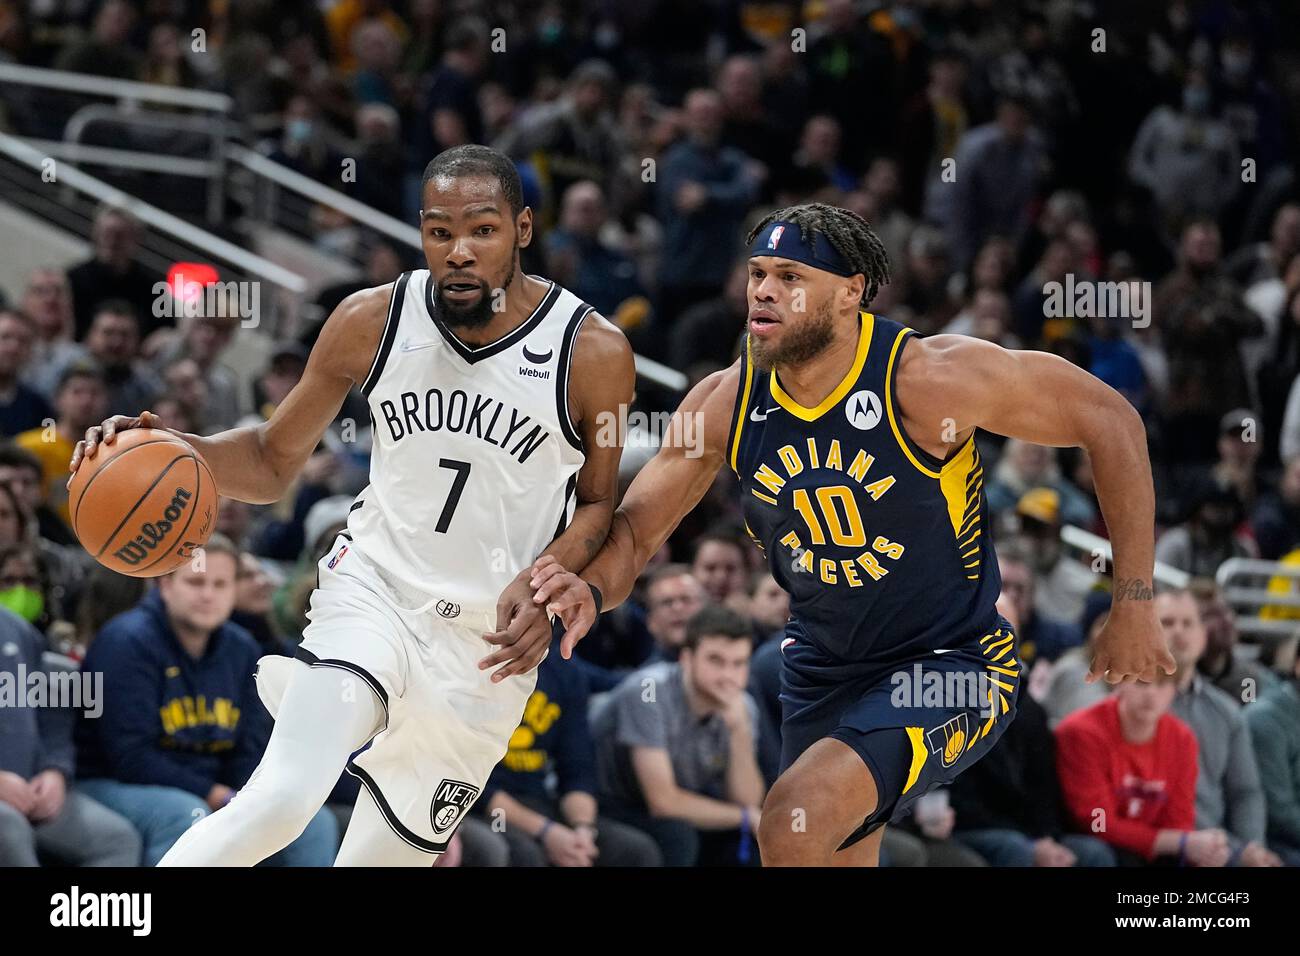 Brooklyn Nets' Kevin Durant (7) dribbles against Indiana Pacers' Justin  Anderson (10) during the first half of an NBA basketball game, Wednesday,  Jan. 5, 2022, in Indianapolis. (AP Photo/Darron Cummings Stock Photo - Alamy